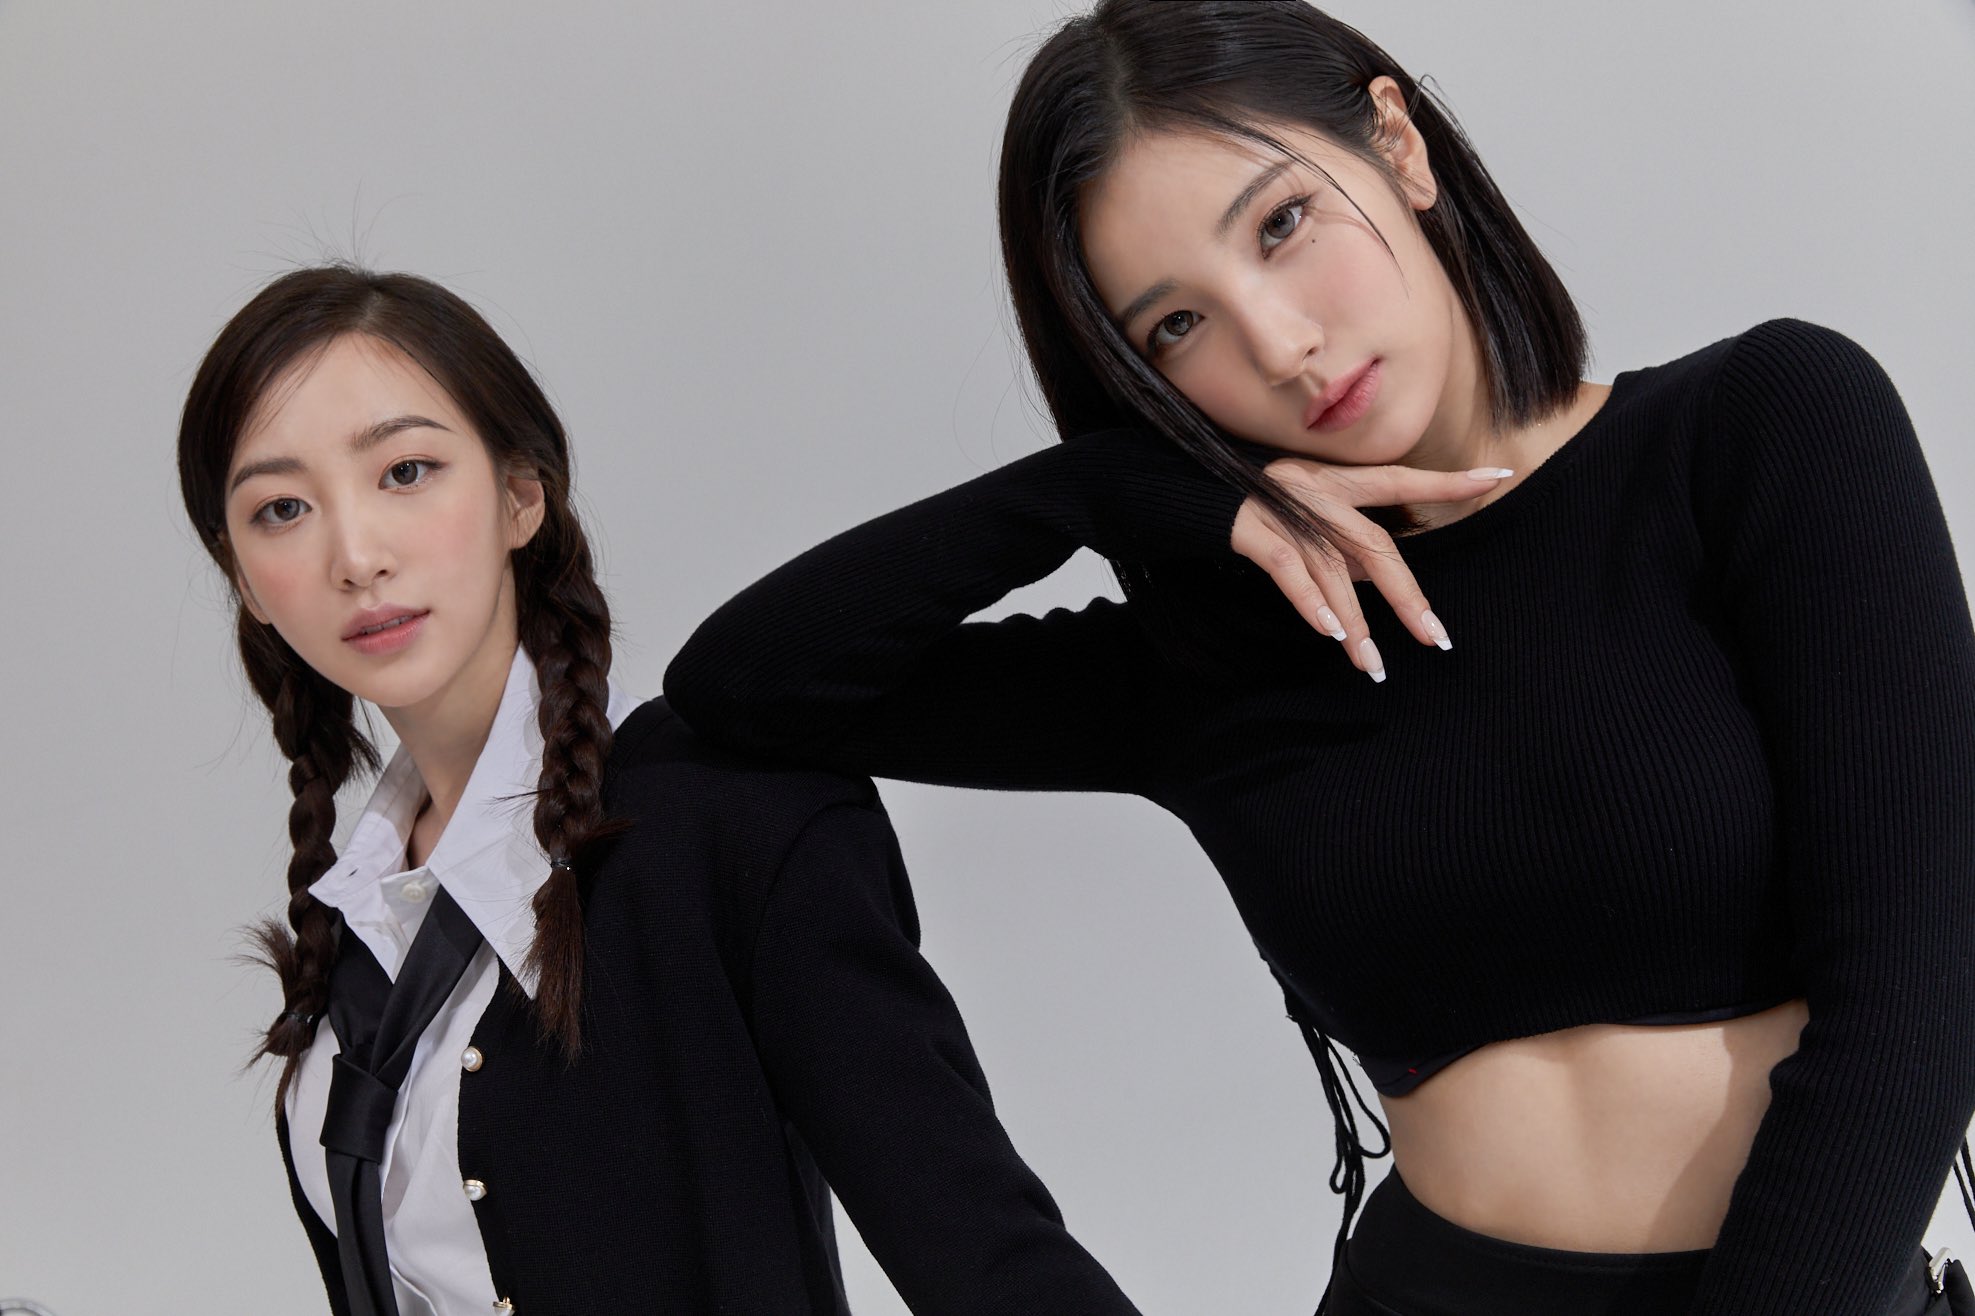 ALICE named as first idol models for underwear brand VIVIEN, photos from ‘It’s My Fit’ campaign released